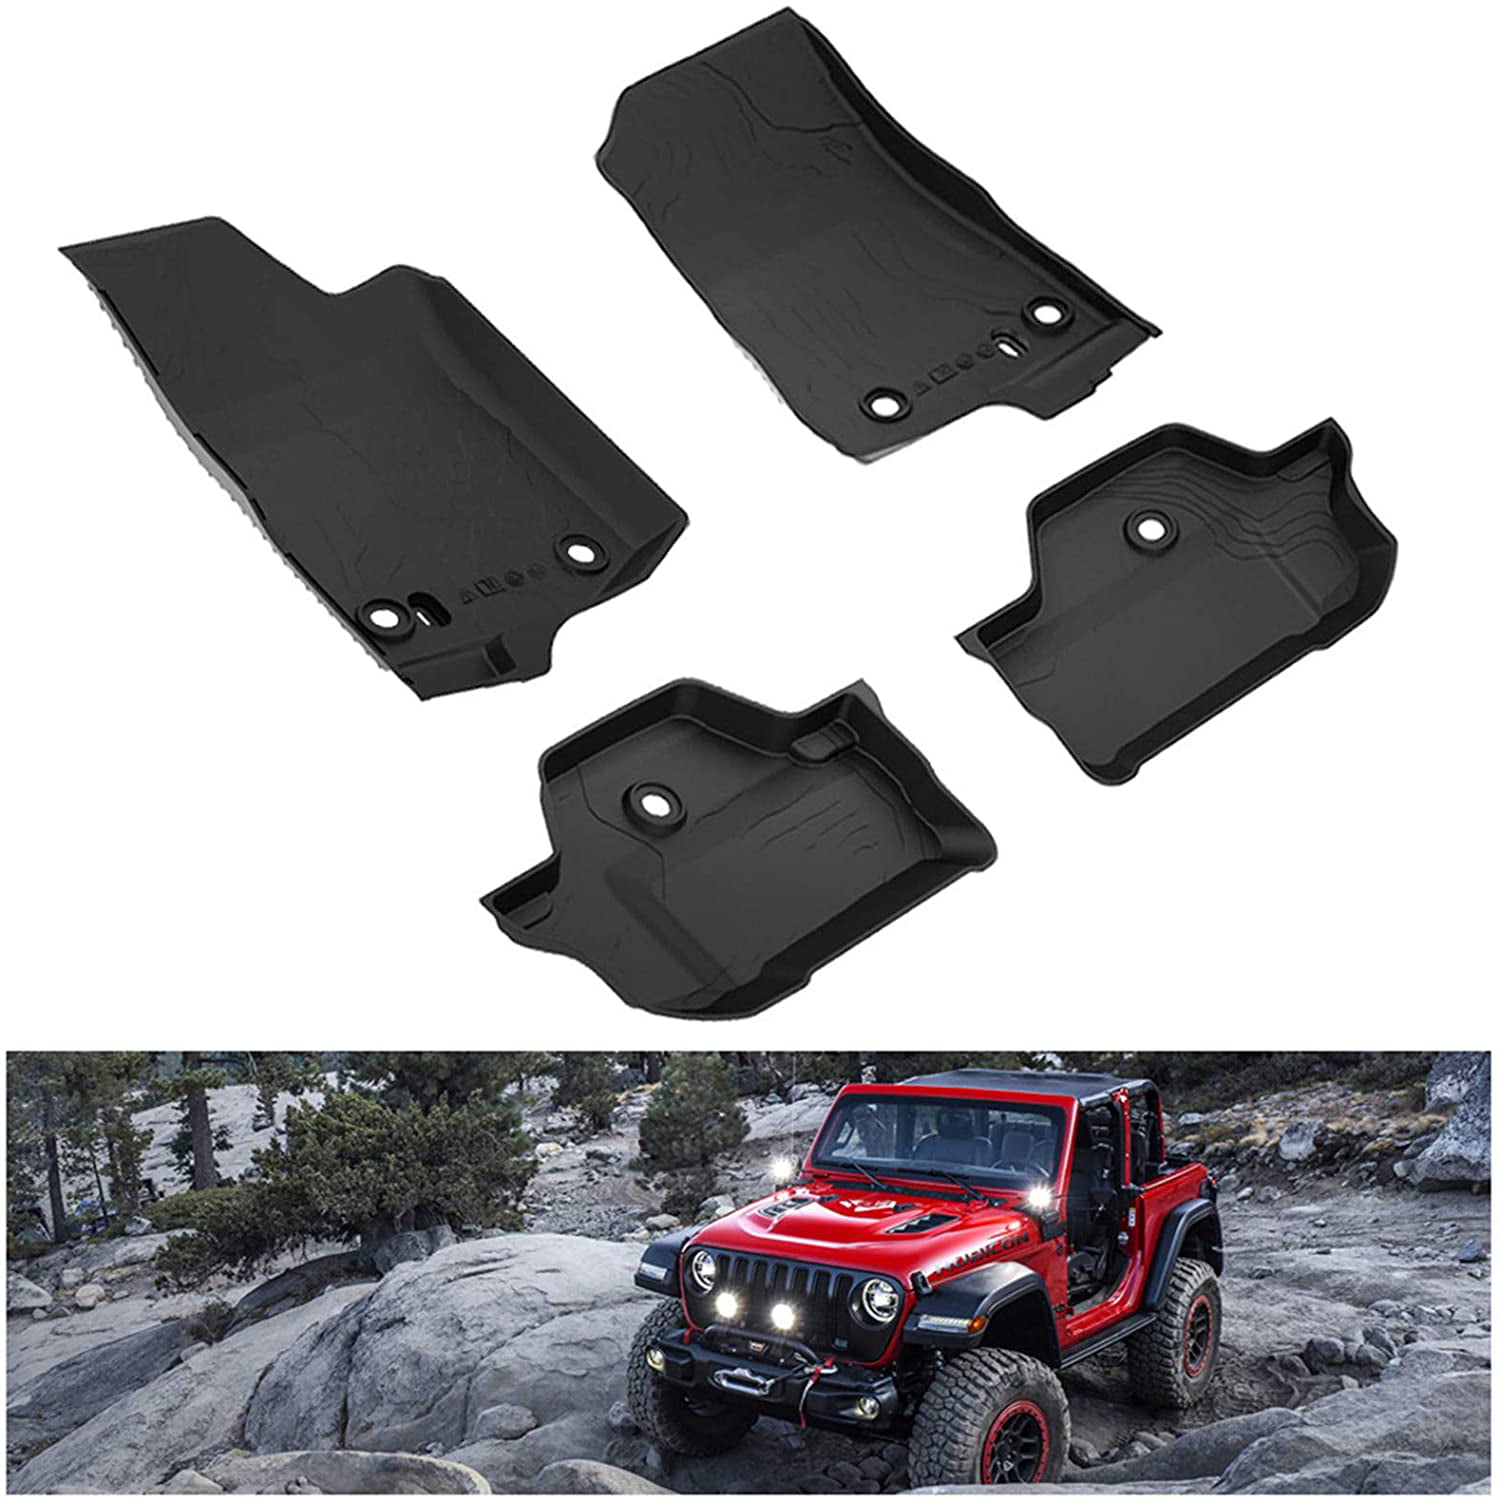 KIWI MASTER Floor Mats Compatible for Wrangler JL 2018 2019 New Jeep 4-Door OEM Floor Liners TPE All Weather Protector Slush Mat Front and Rear Row Black 